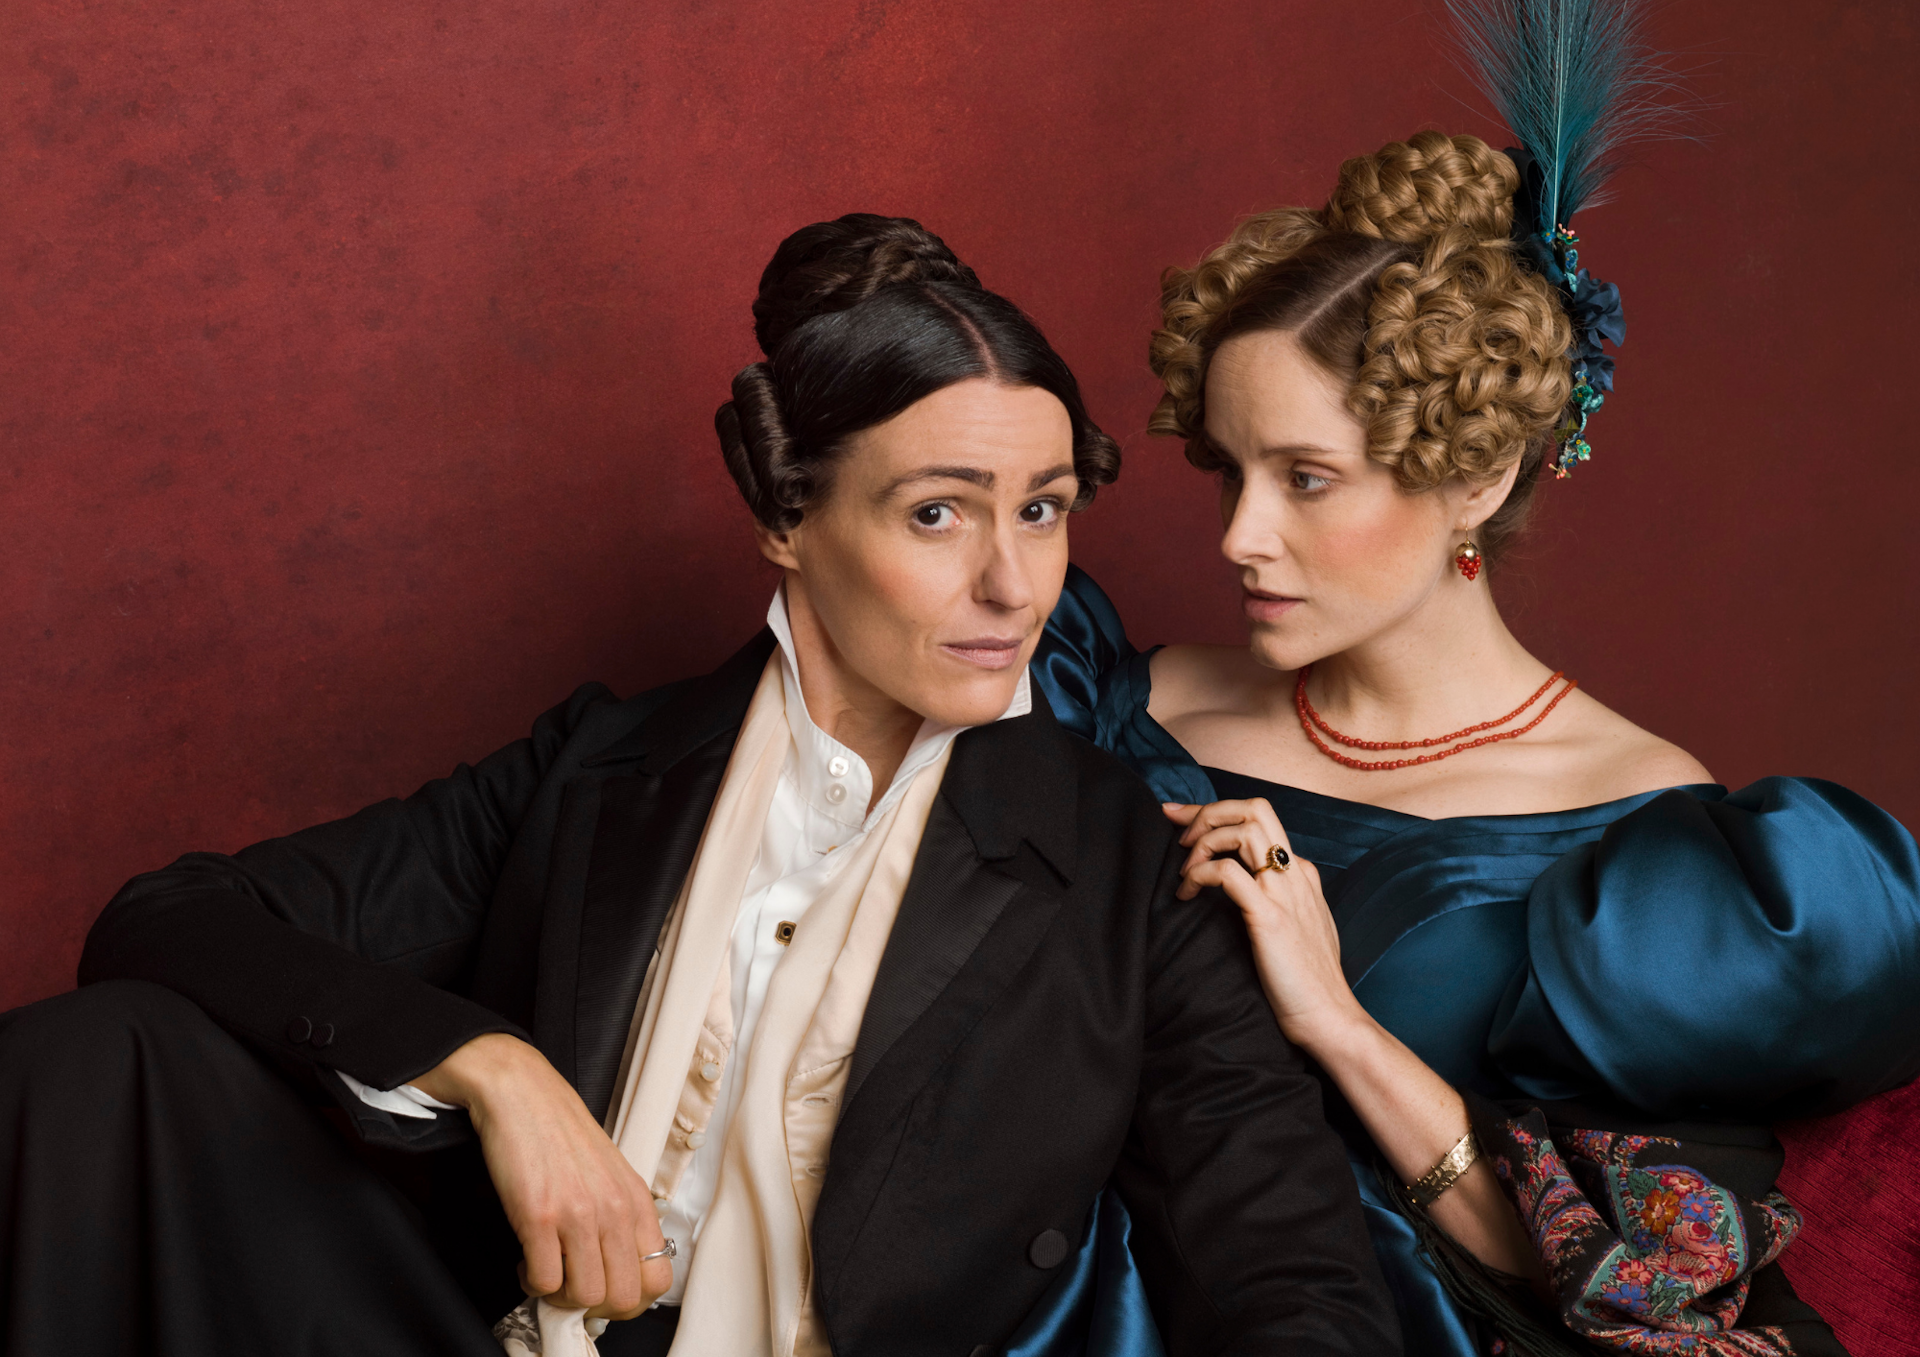 Five lesbian expressions from the 19th century to remember when watching Gentleman Jack pic